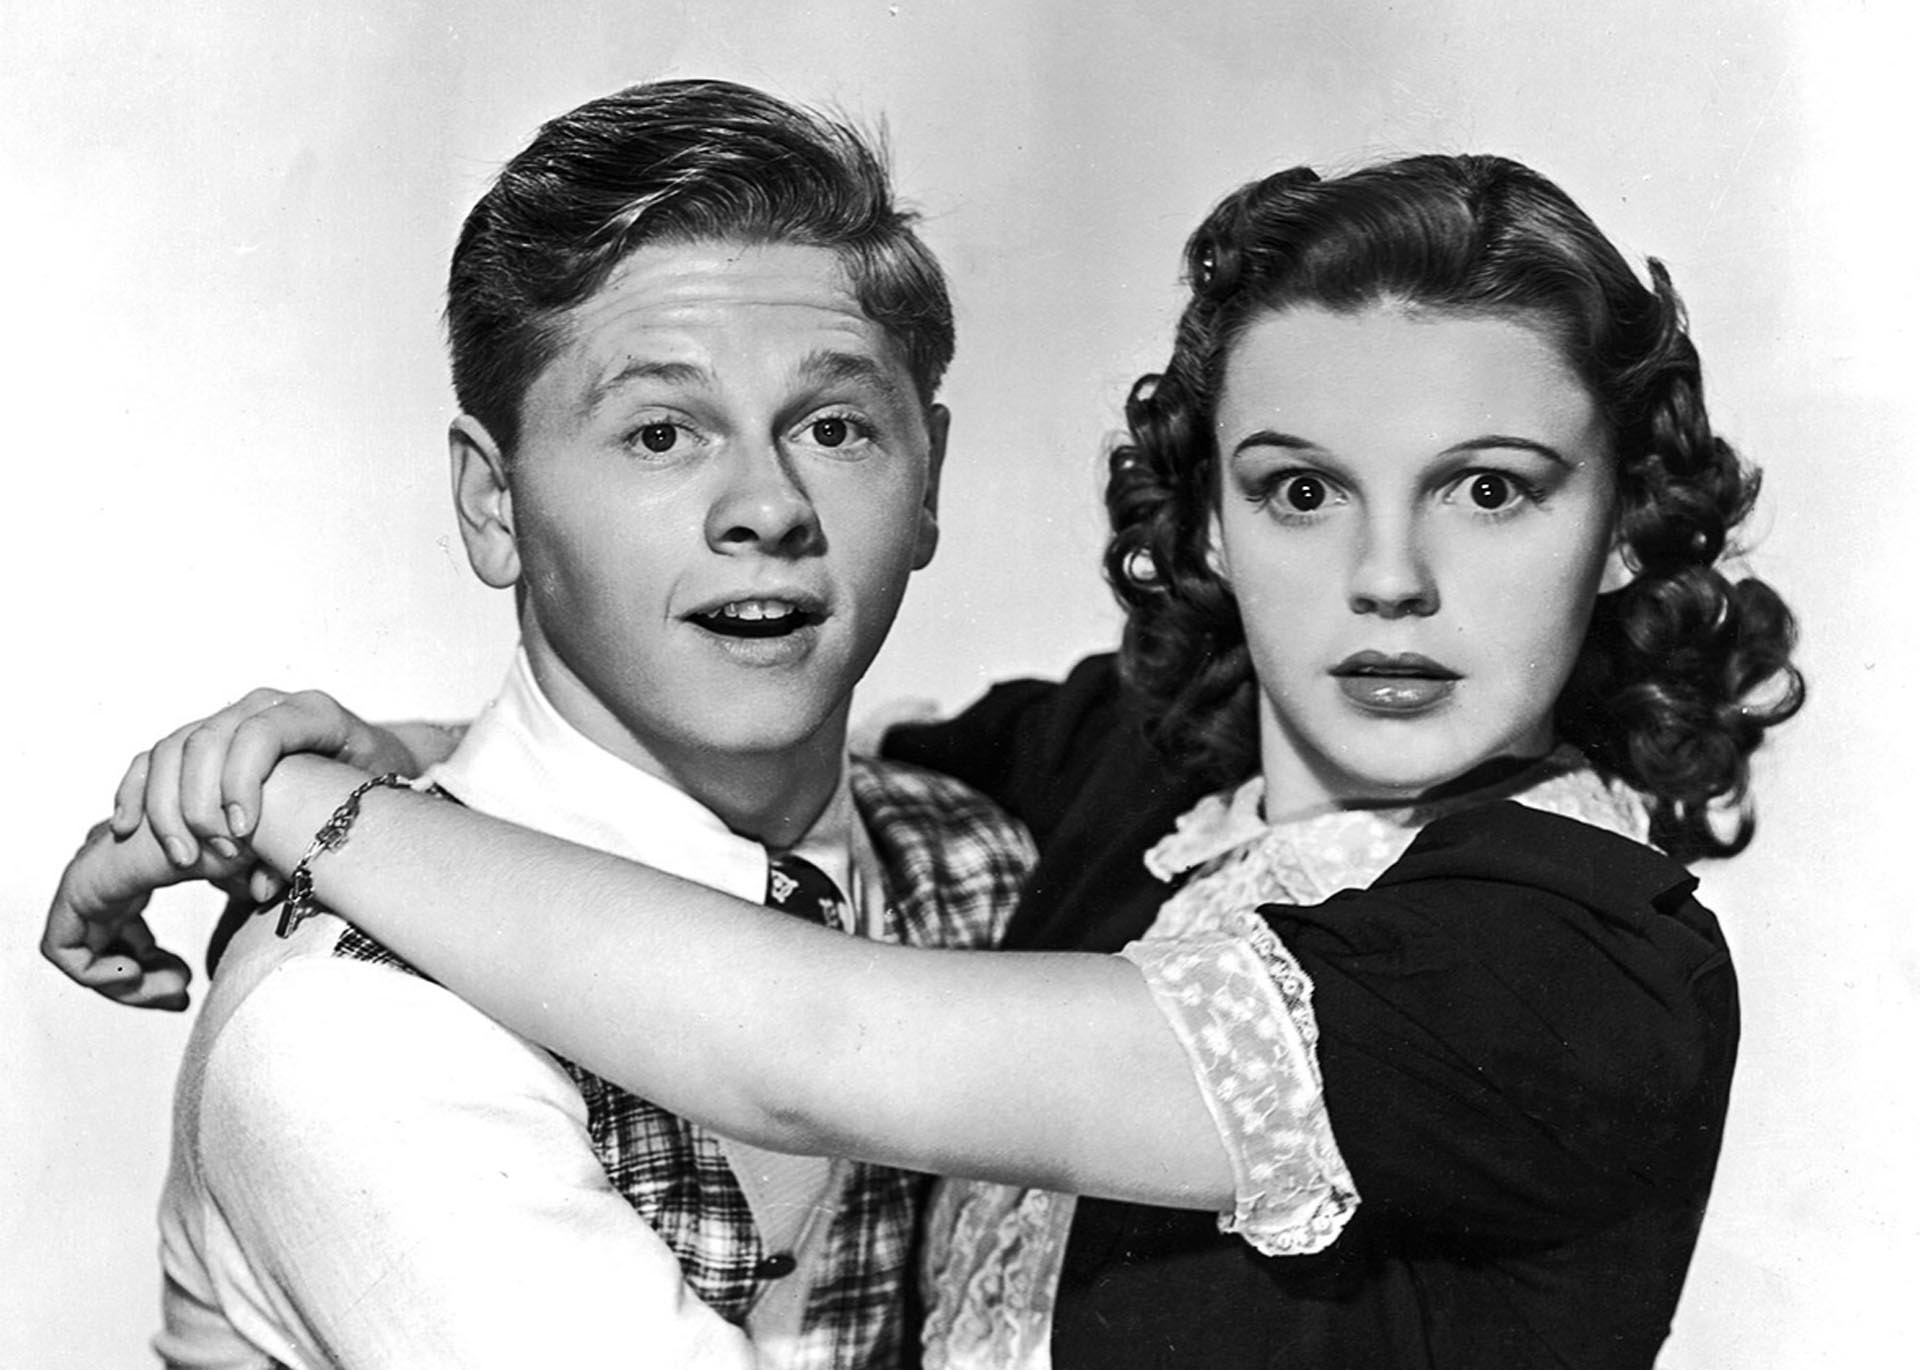 Judy Garland with Mickey Rooney, were great friends from their youth since both began their artistic careers at the same time, in addition to acting together in several films Photo: (Archive / Getty Images)